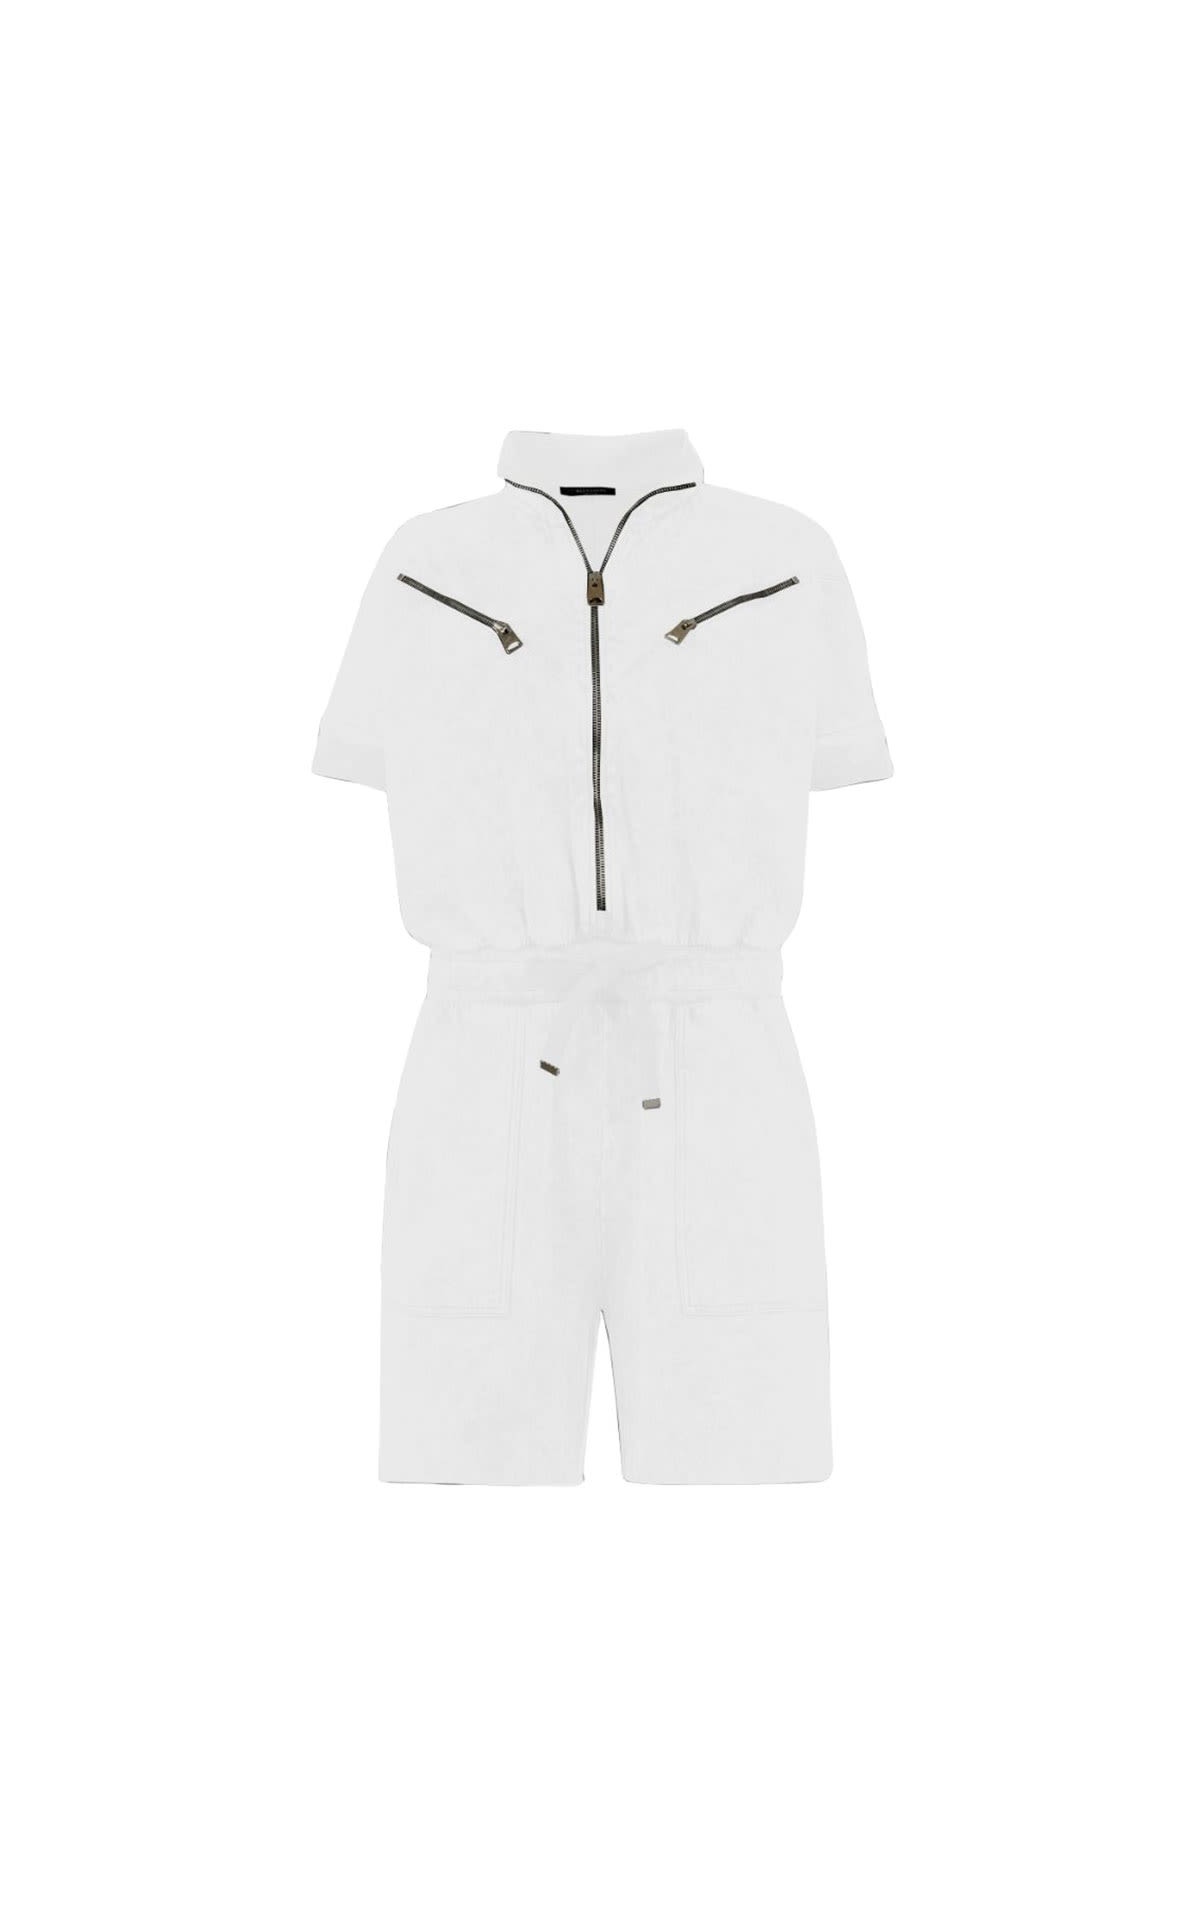 AllSaints Tia playsuit optic white from Bicester Village